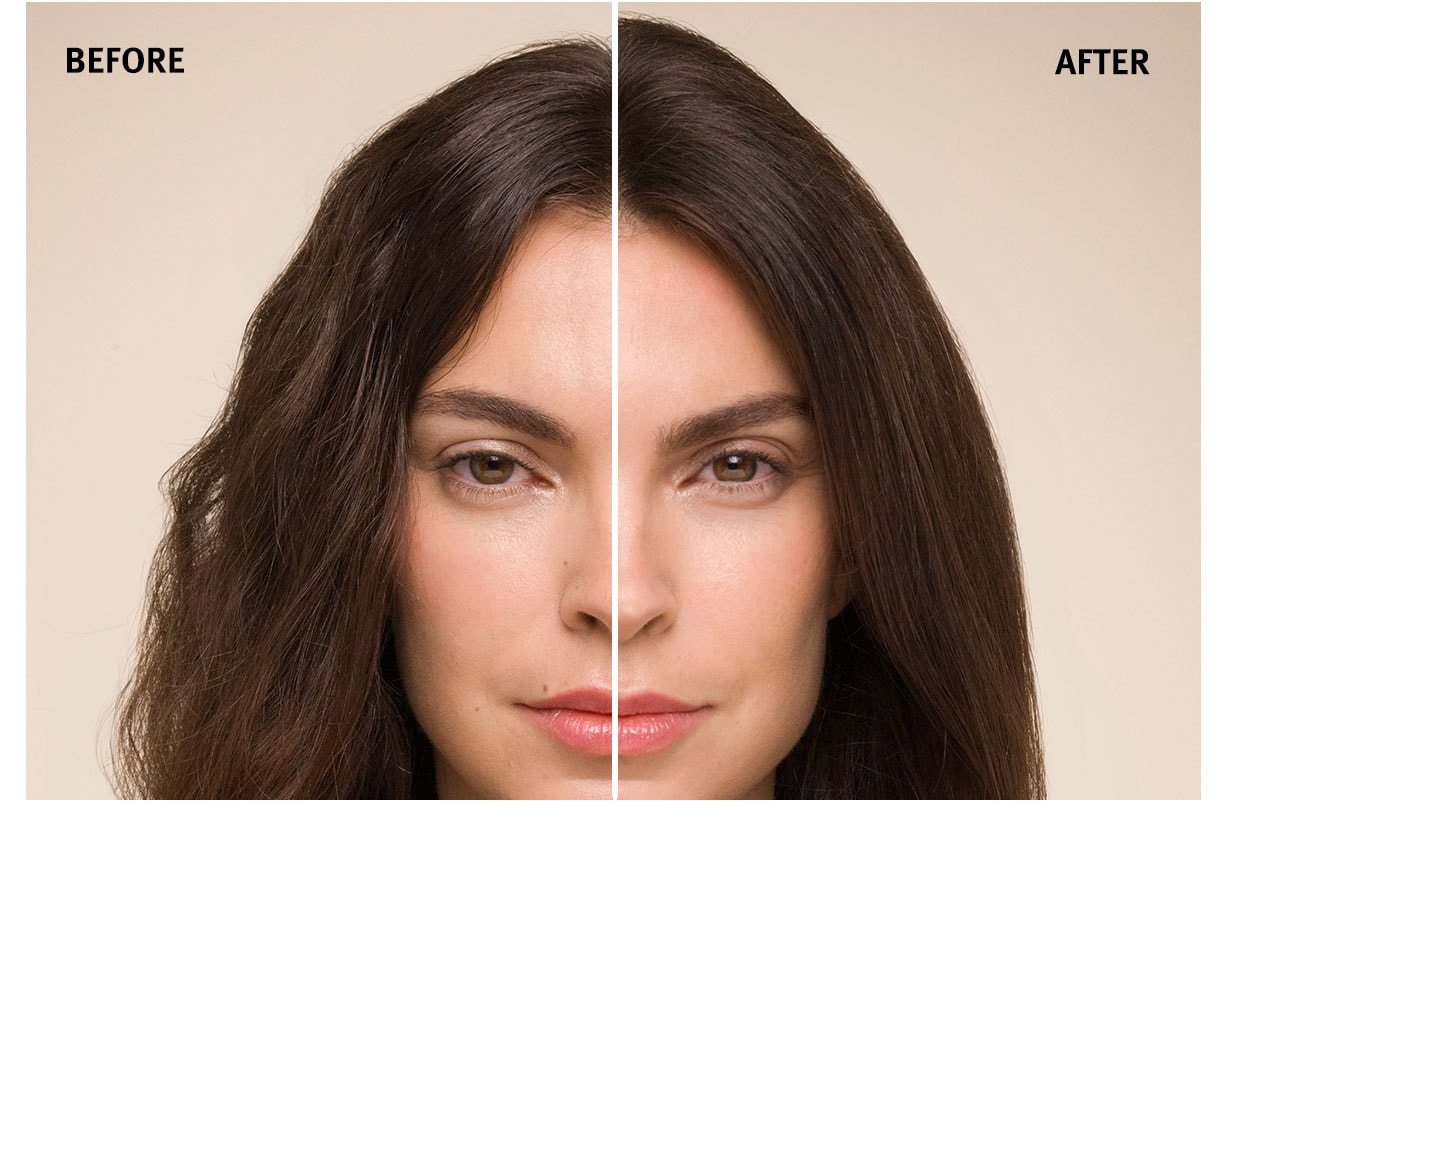 See the difference when using invati ultra advanced